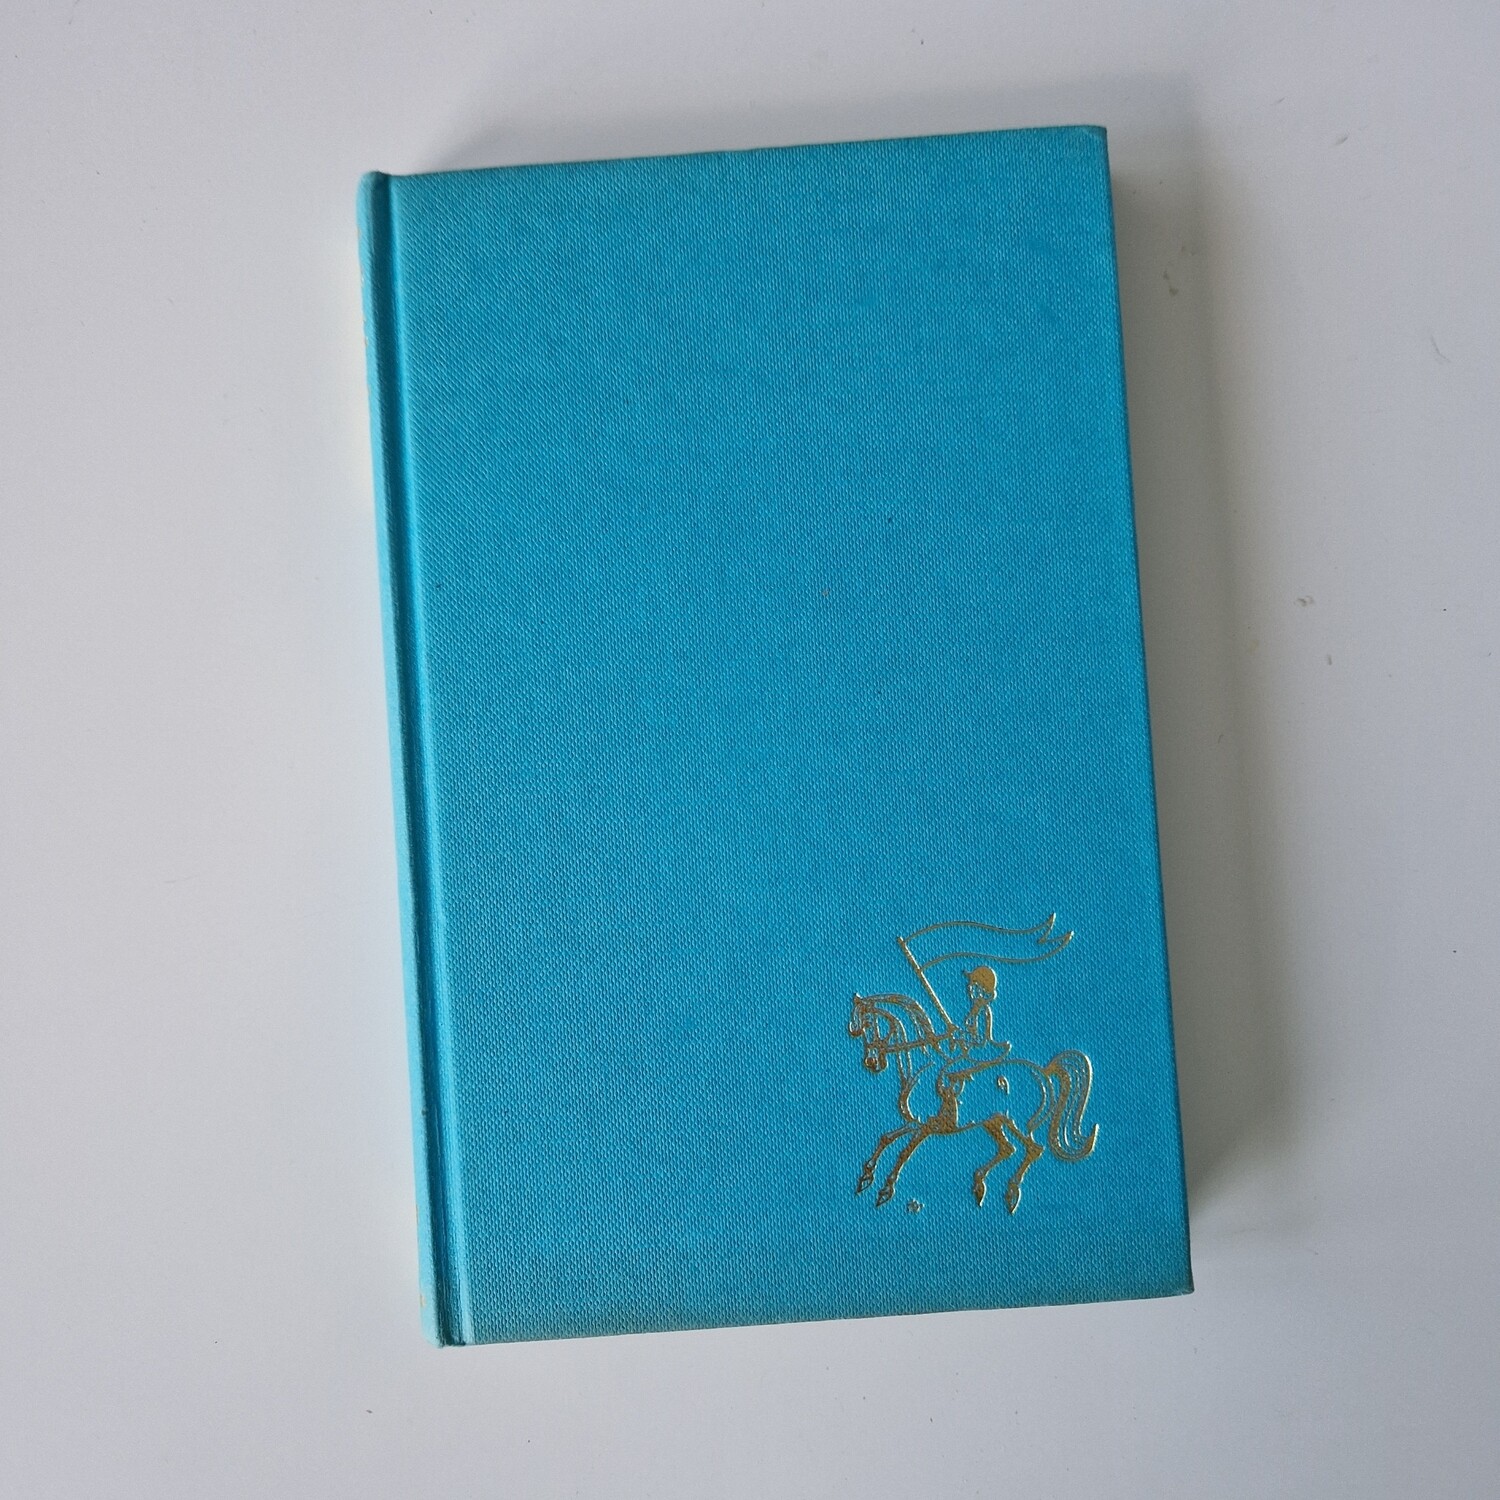 A Guide to Driving Horses - Turquoise Blue Notebook 1971